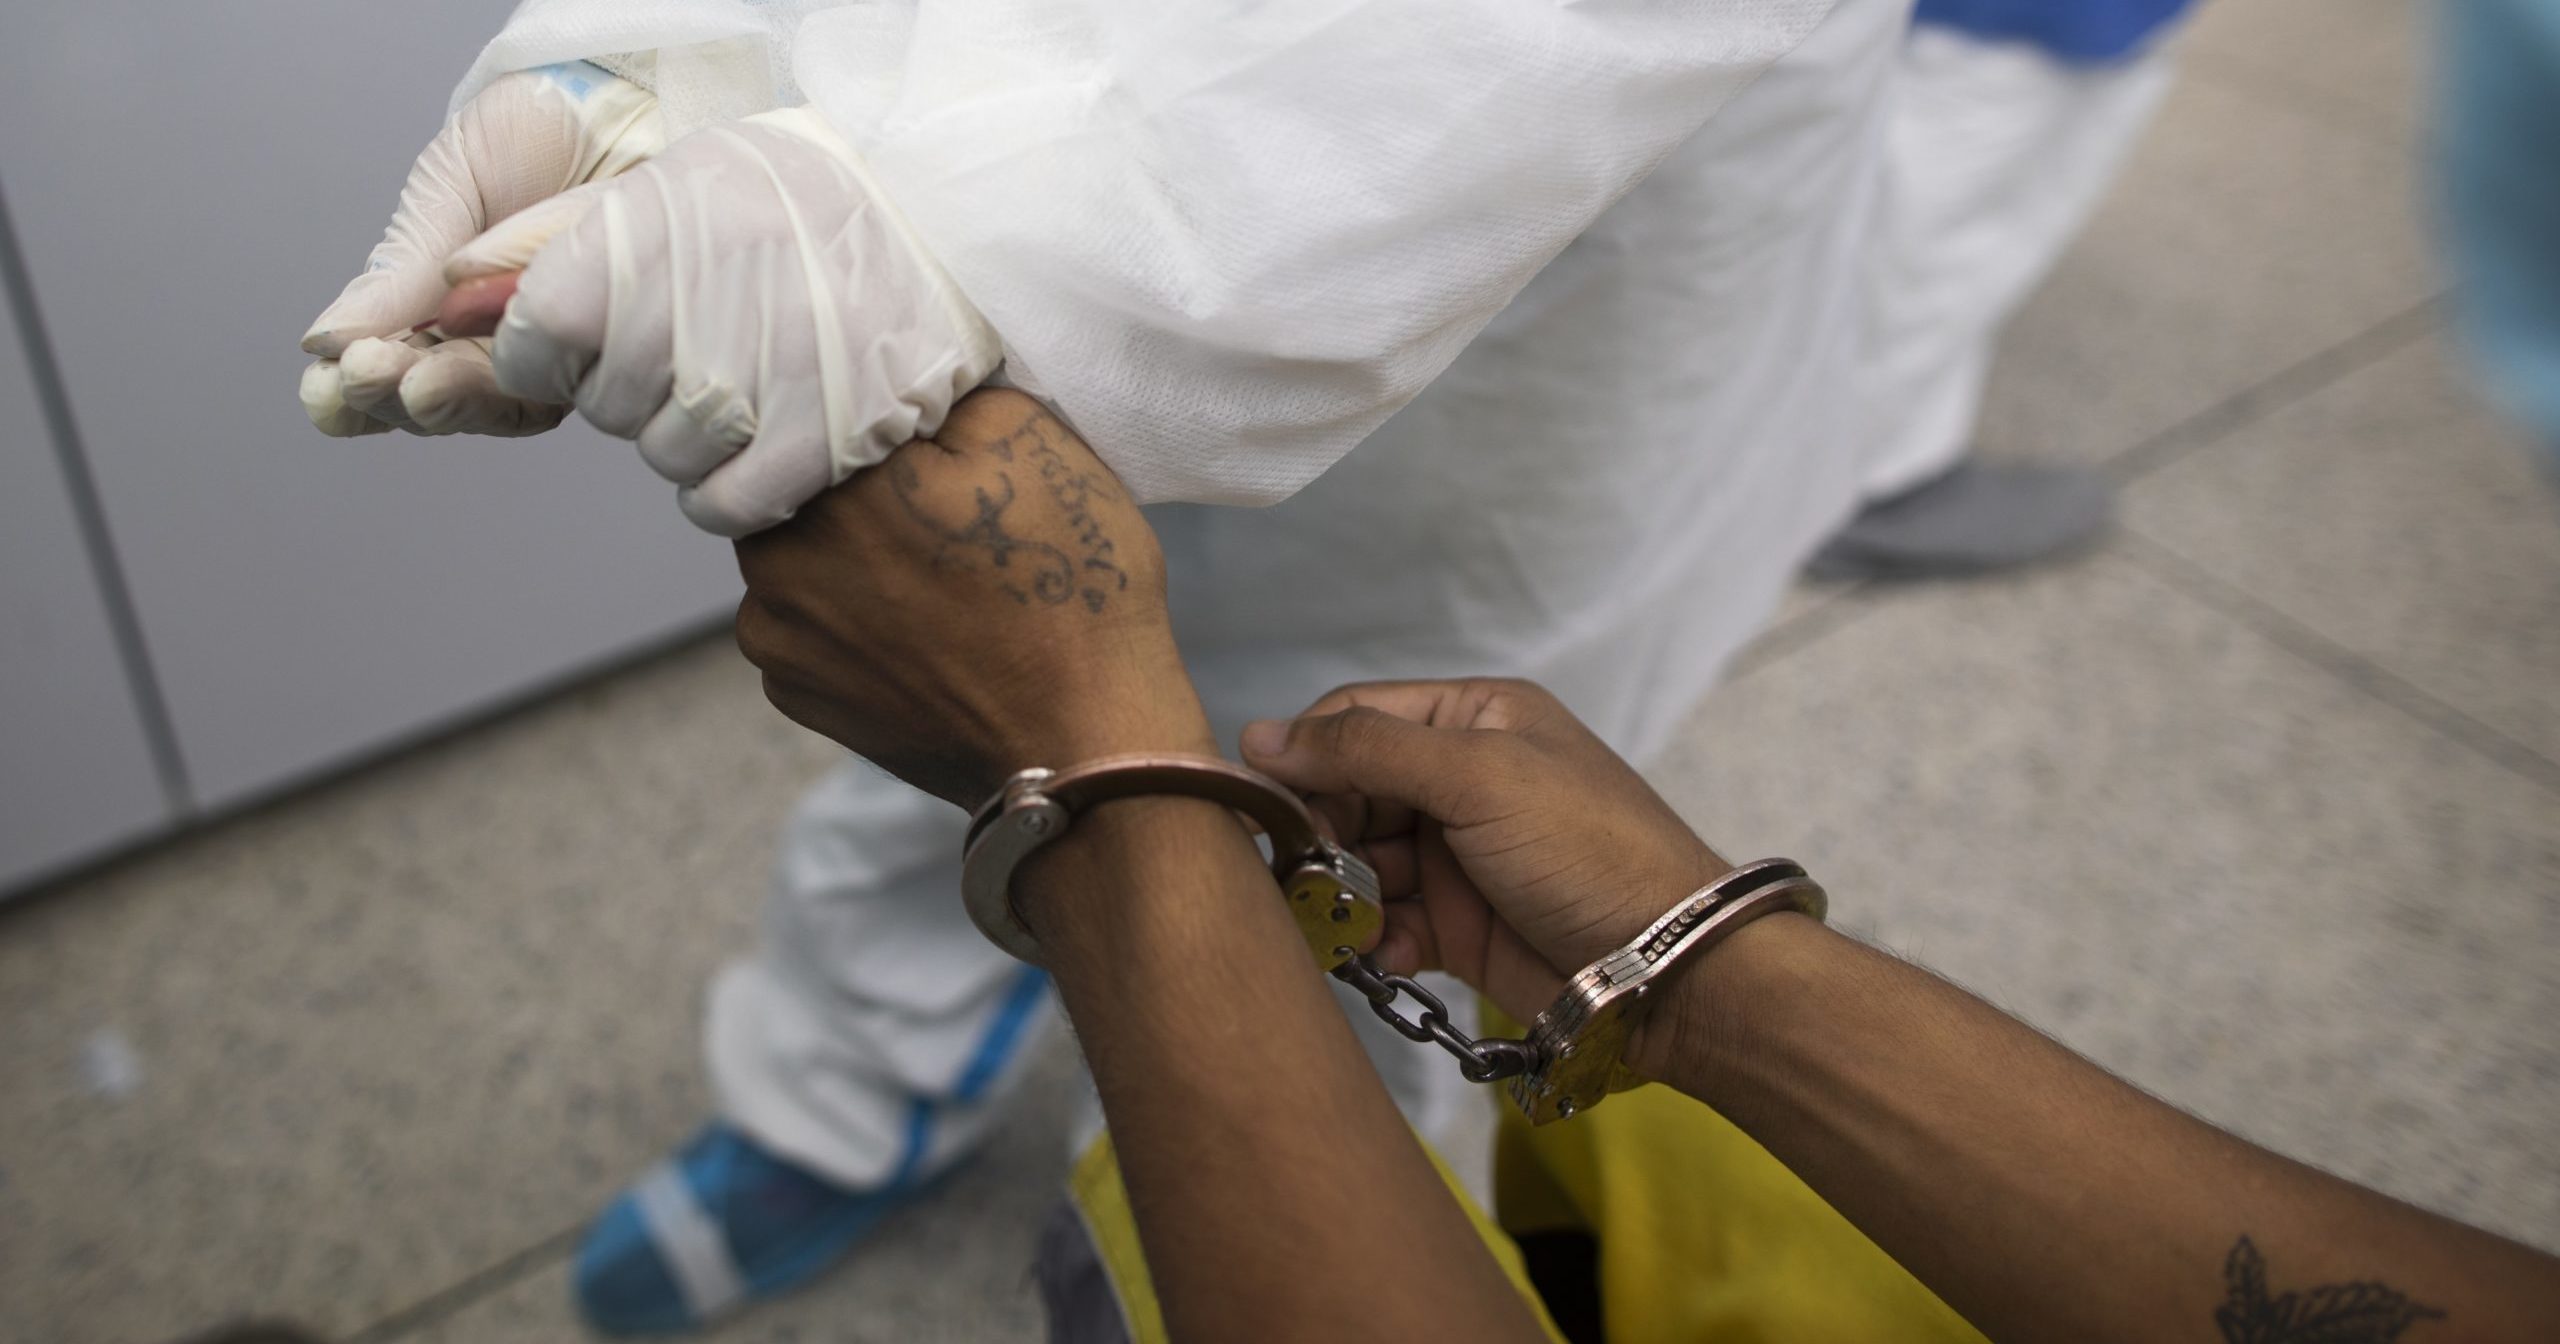 A doctor takes a blood sample for a COVID-19 test from a handcuffed inmate at a diagnosis center in Caracas, Venezuela, on Aug. 27, 2020.